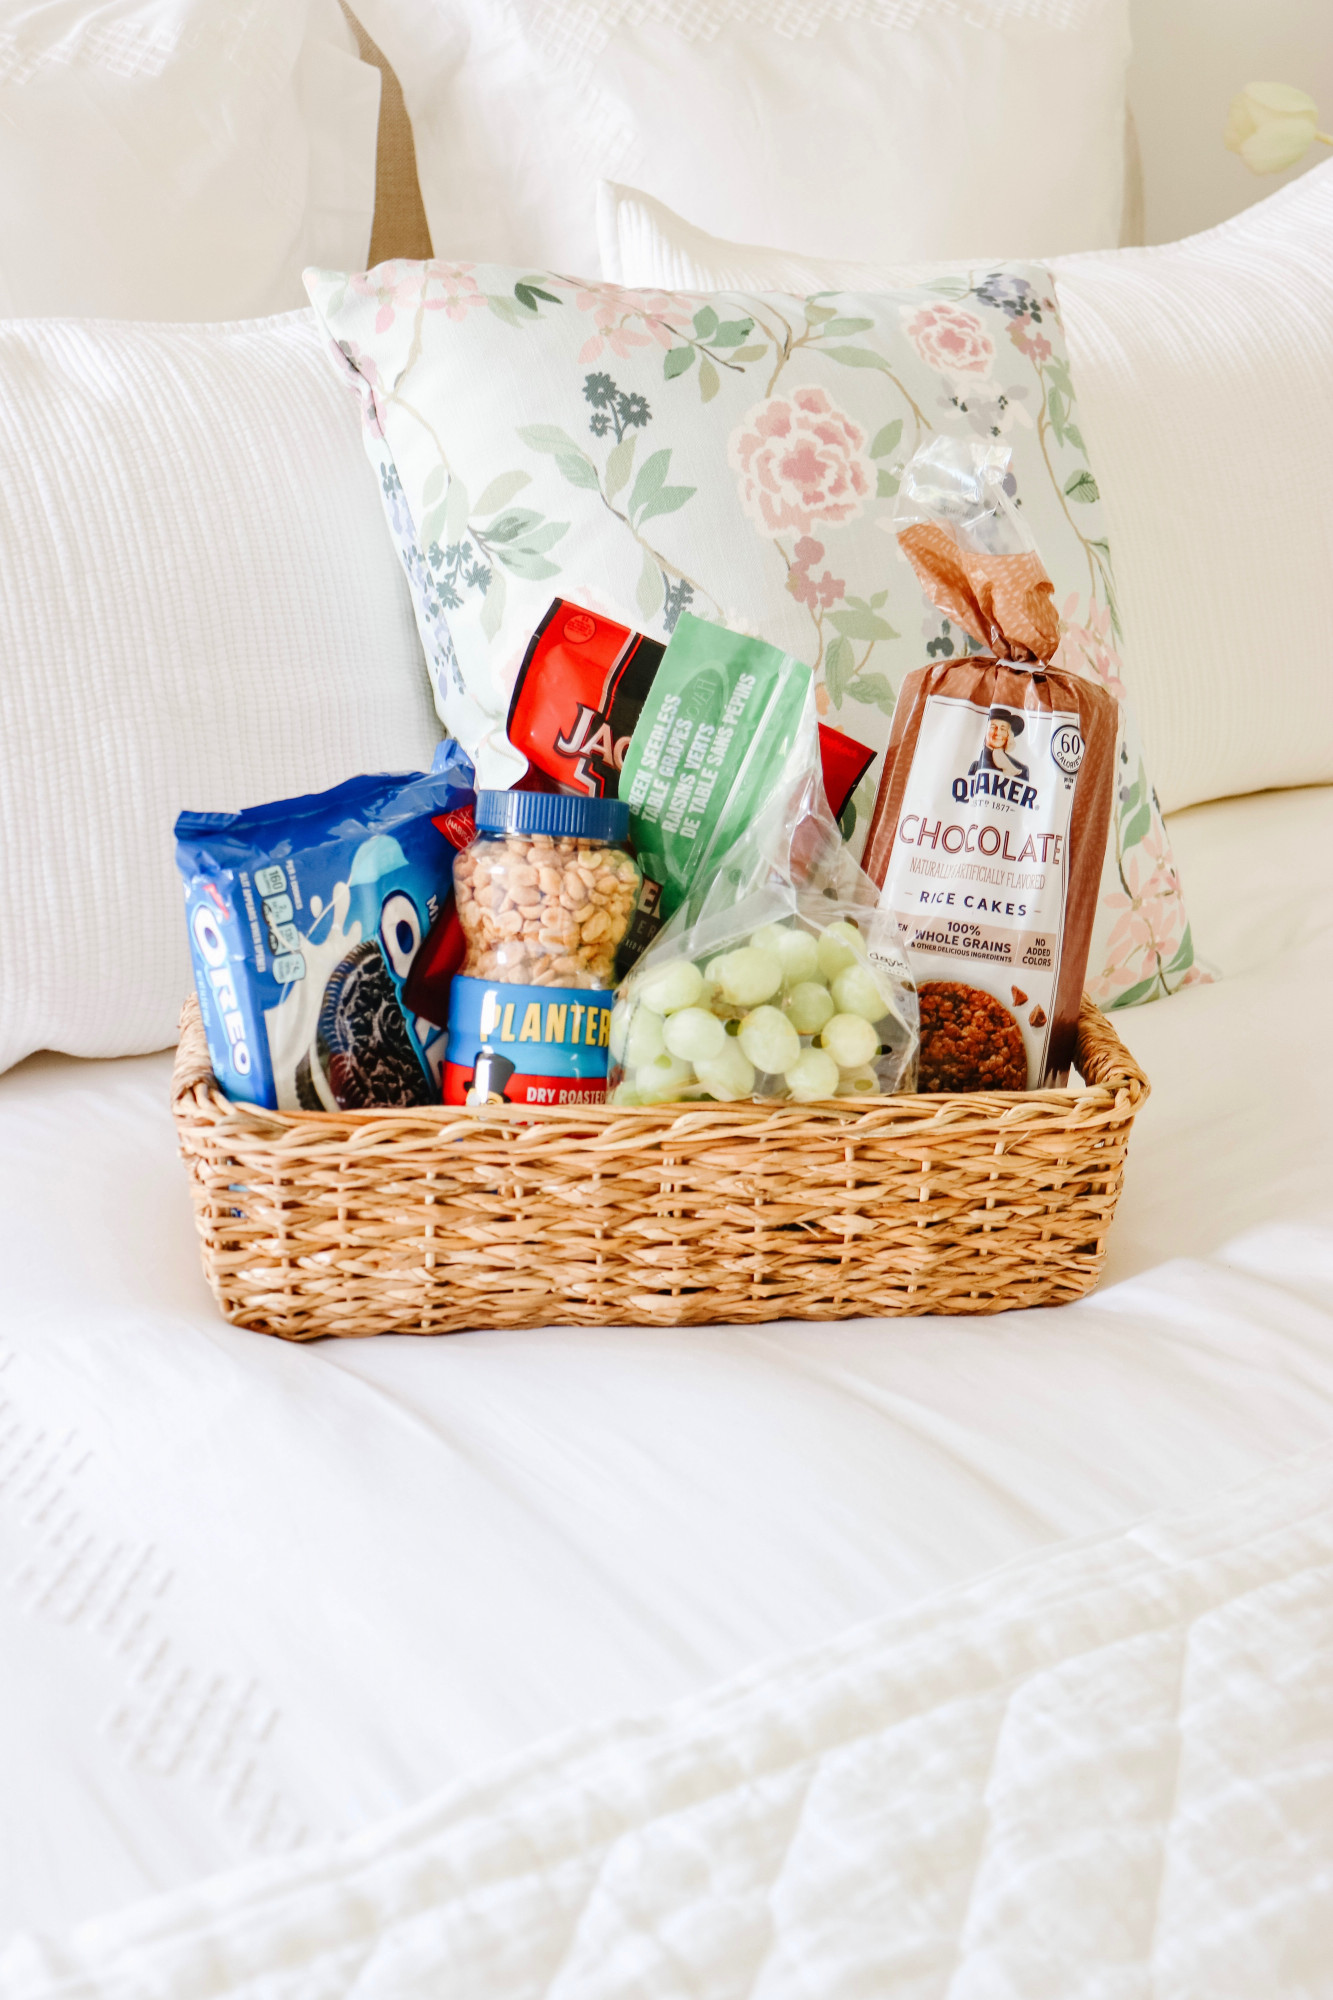 Guest Room ready food favorites